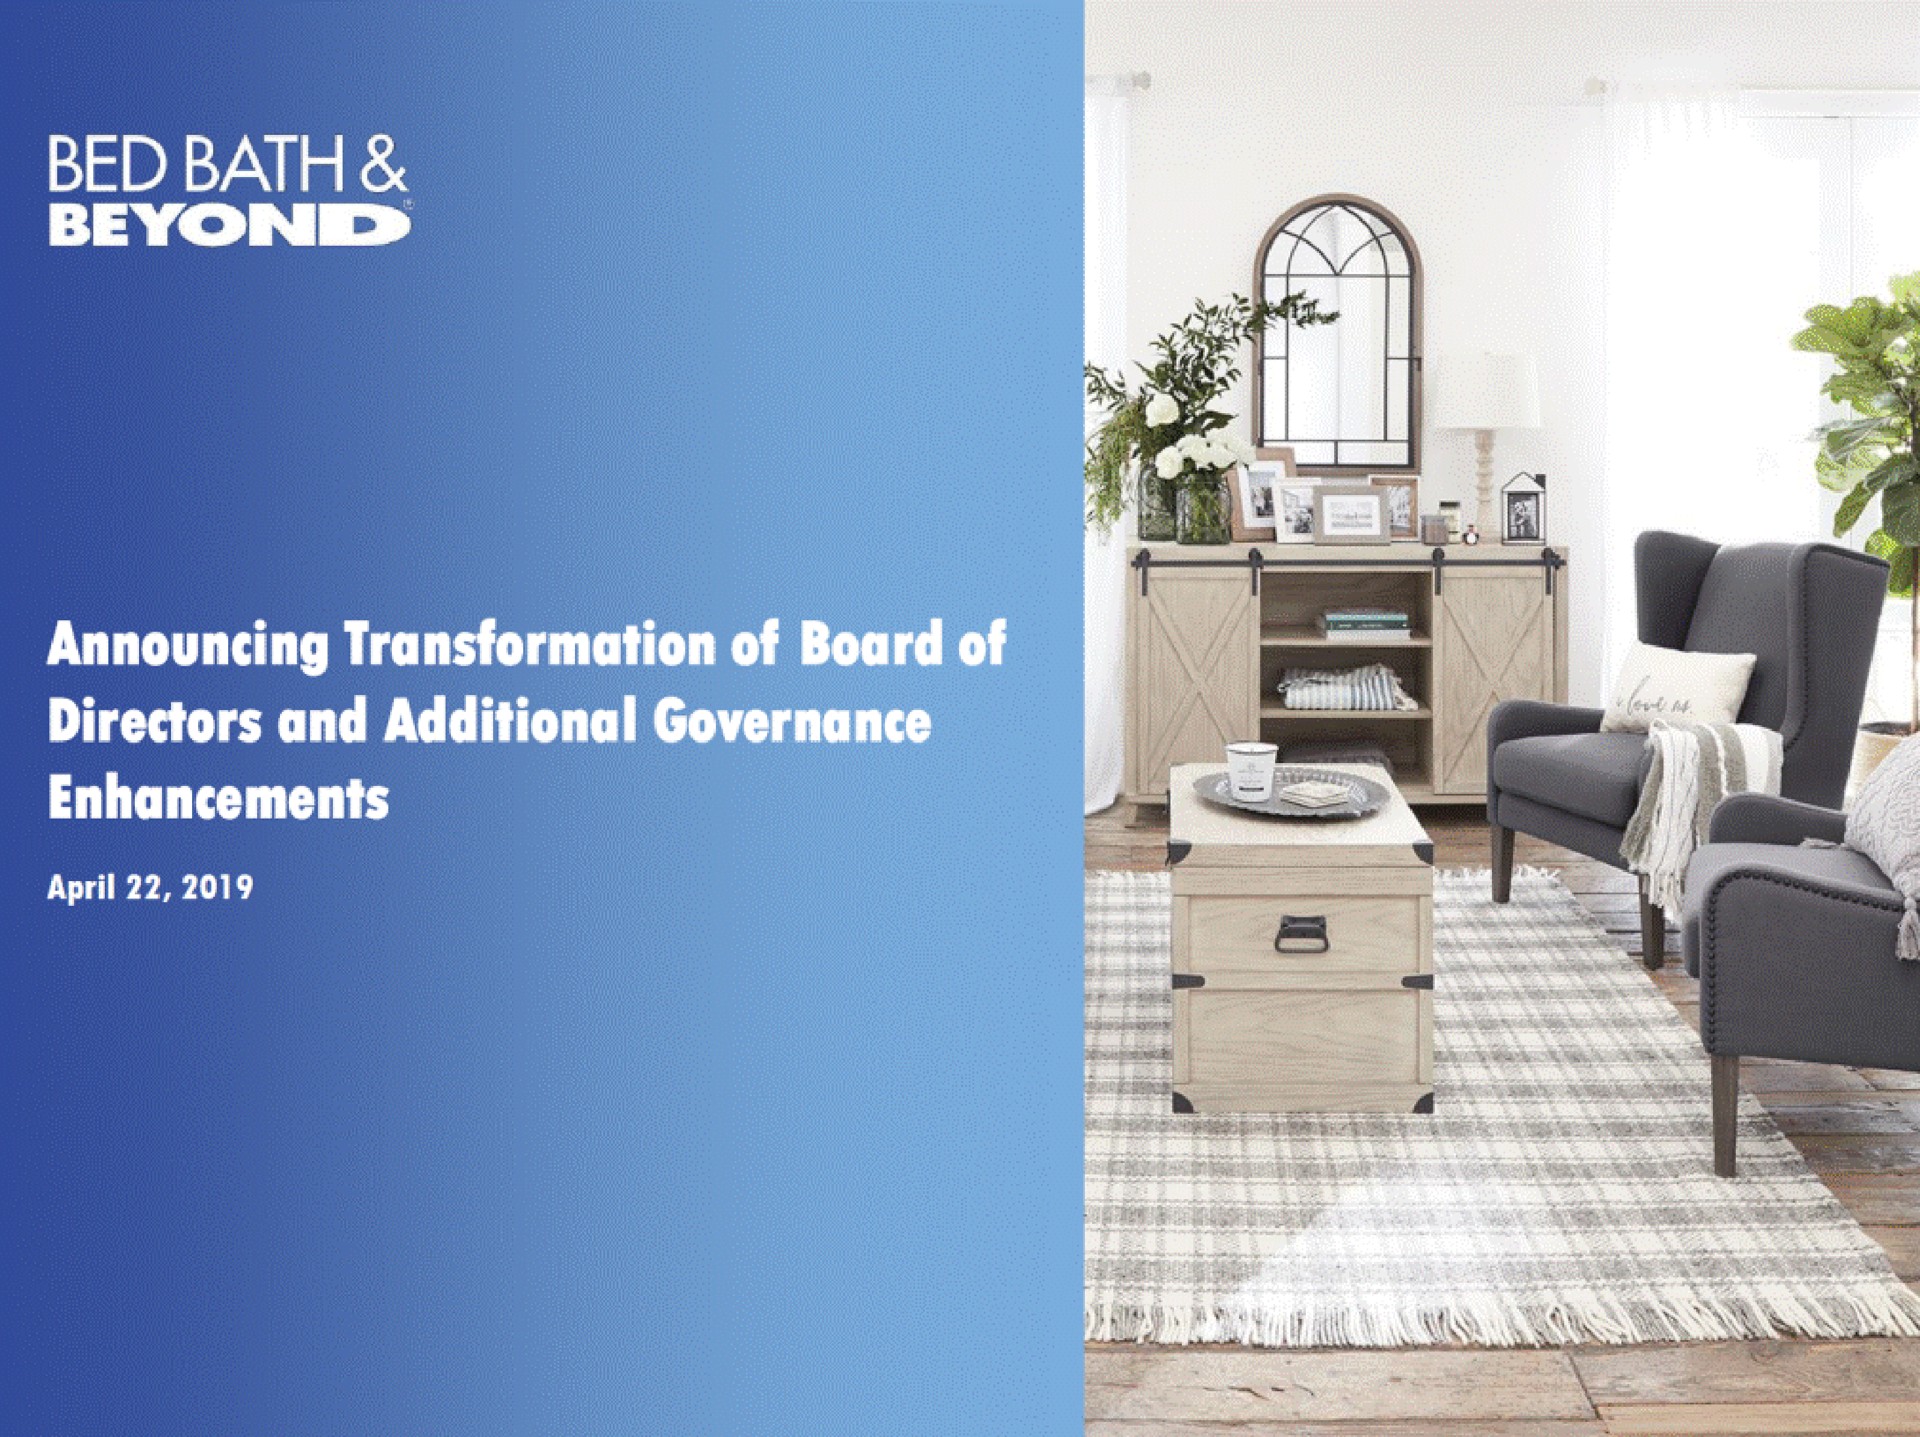 bed bath announcing transformation of board of directors and additional governance | Bed Bath & Beyond